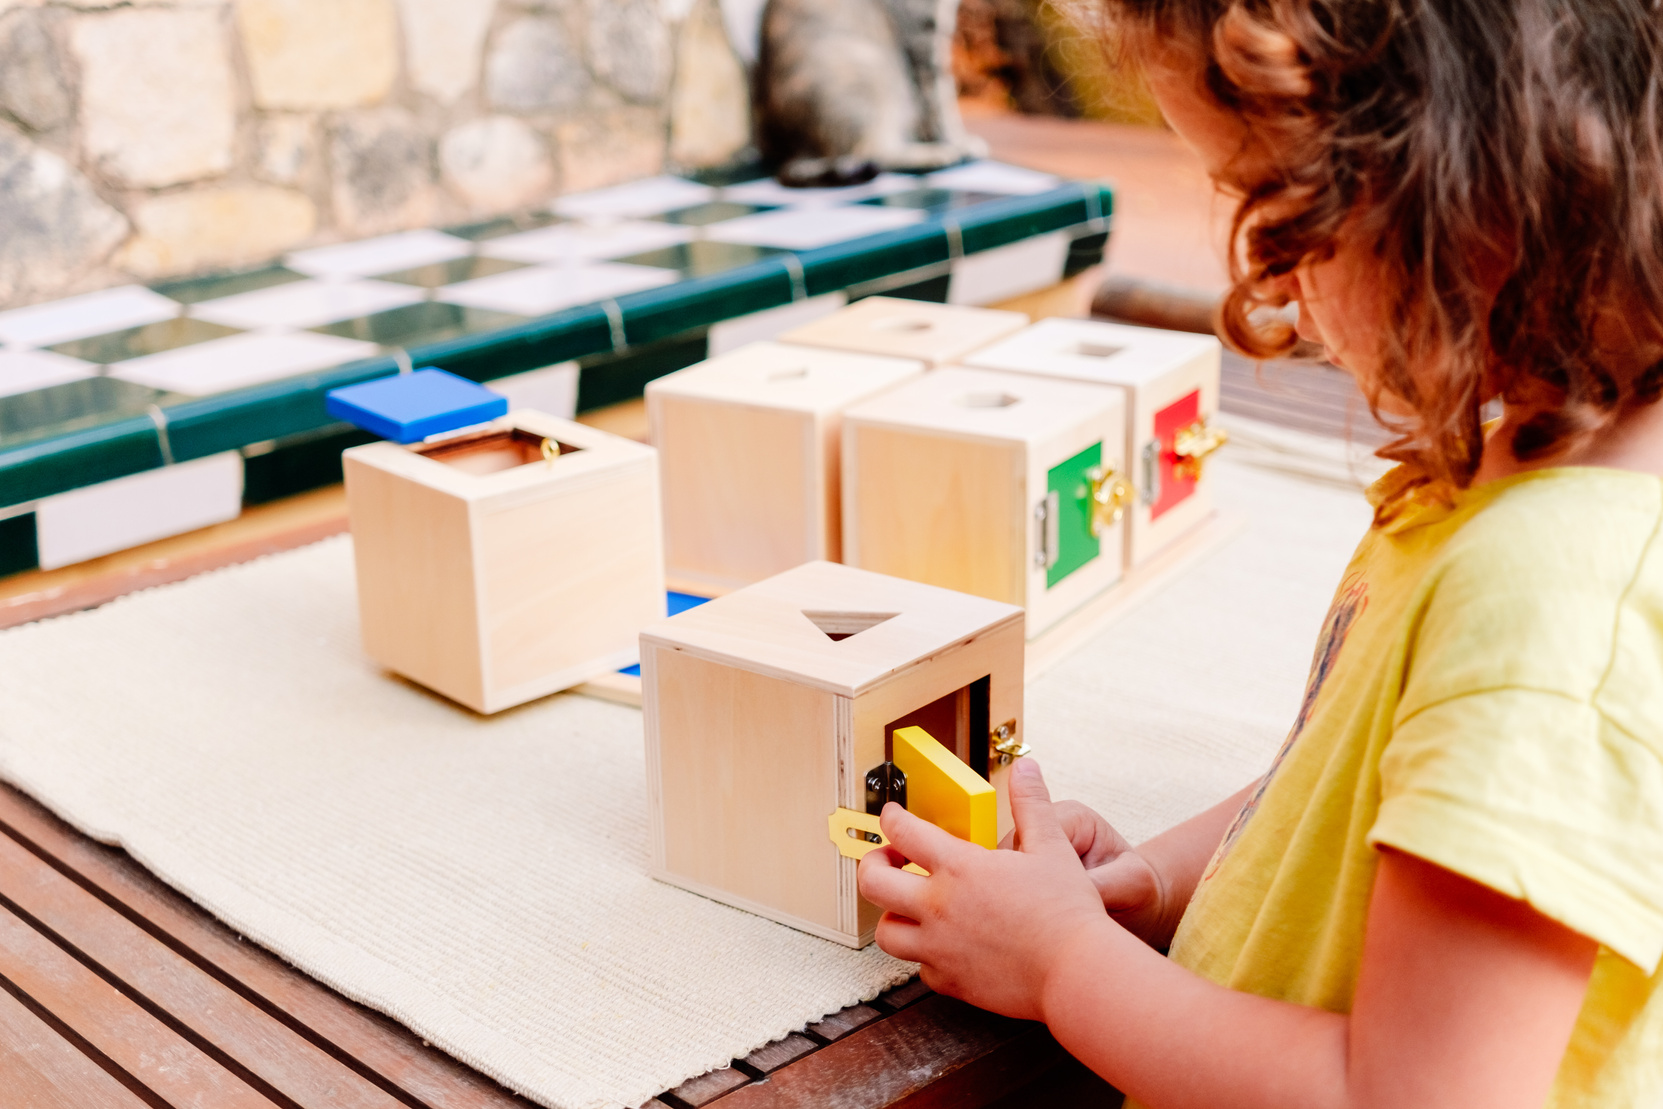 A Girl Manipulates Sensory Montessori Material, Wooden Boxes to